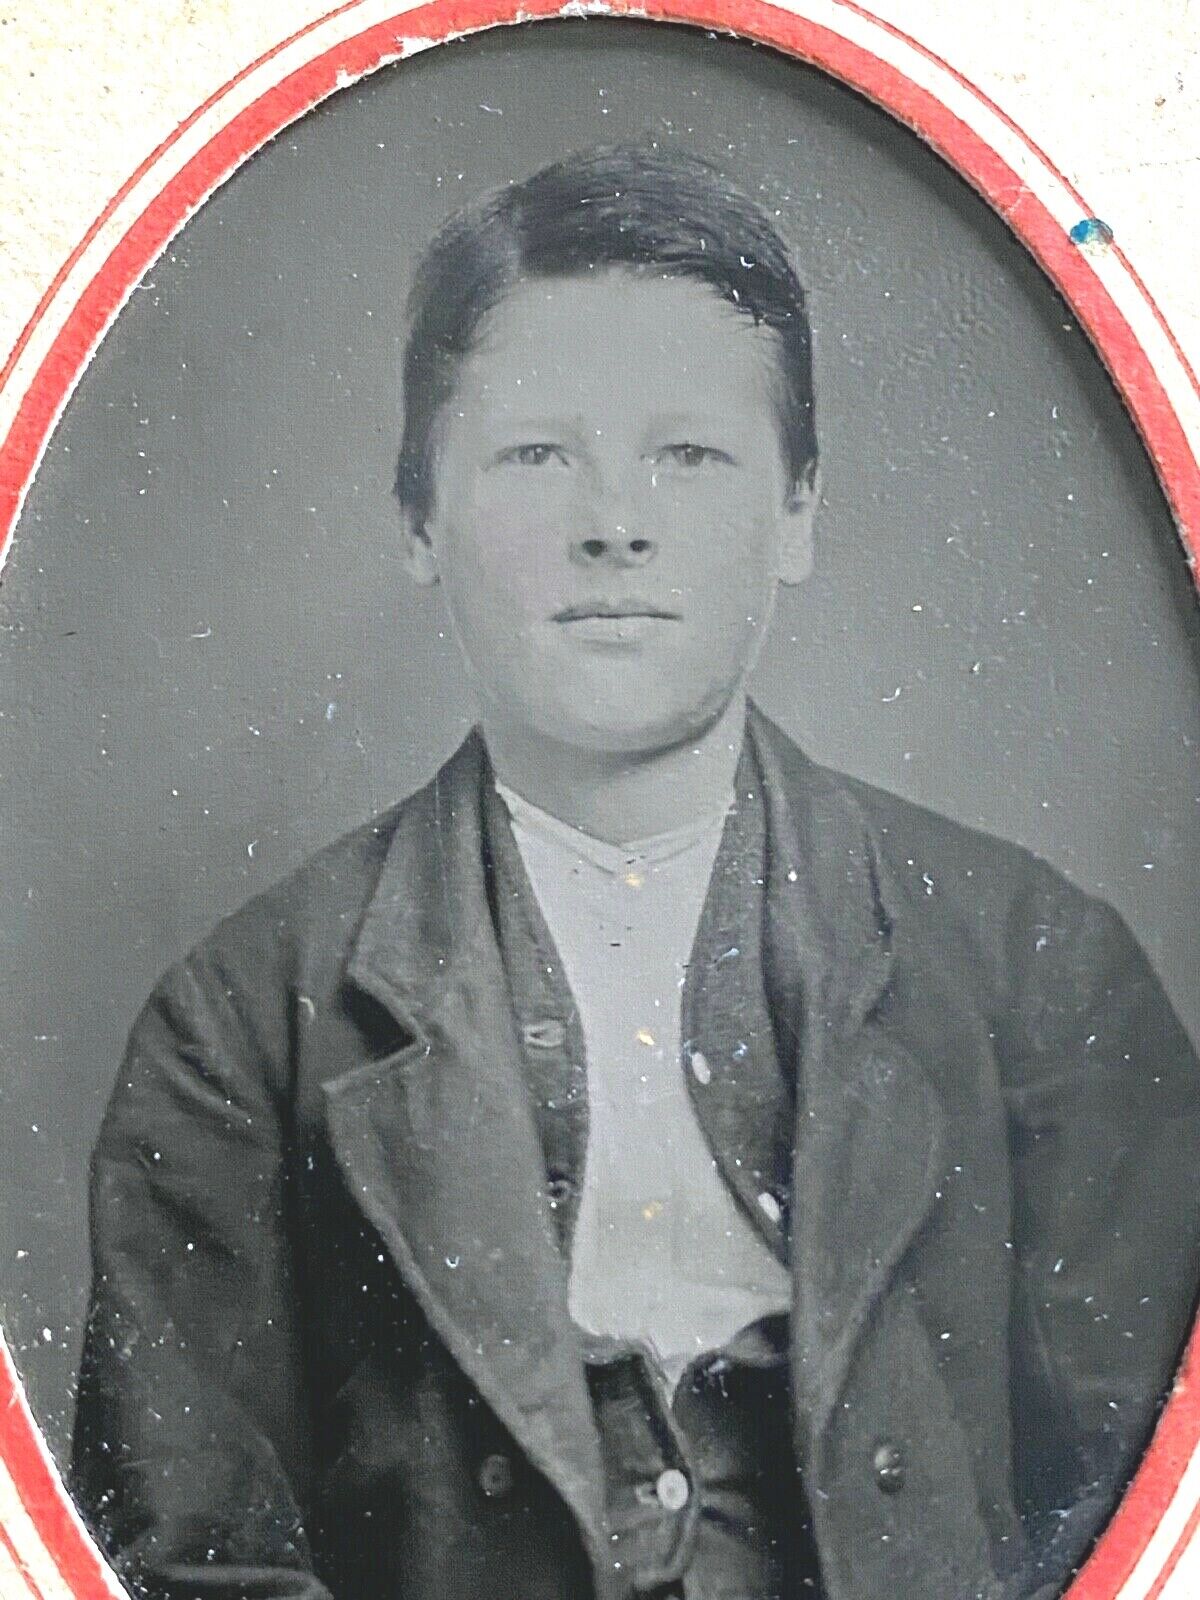 1870s TINTYPE PHOTOGRAPH antique b&w photo YOUNG MAN American Frontier 2.5 x 4